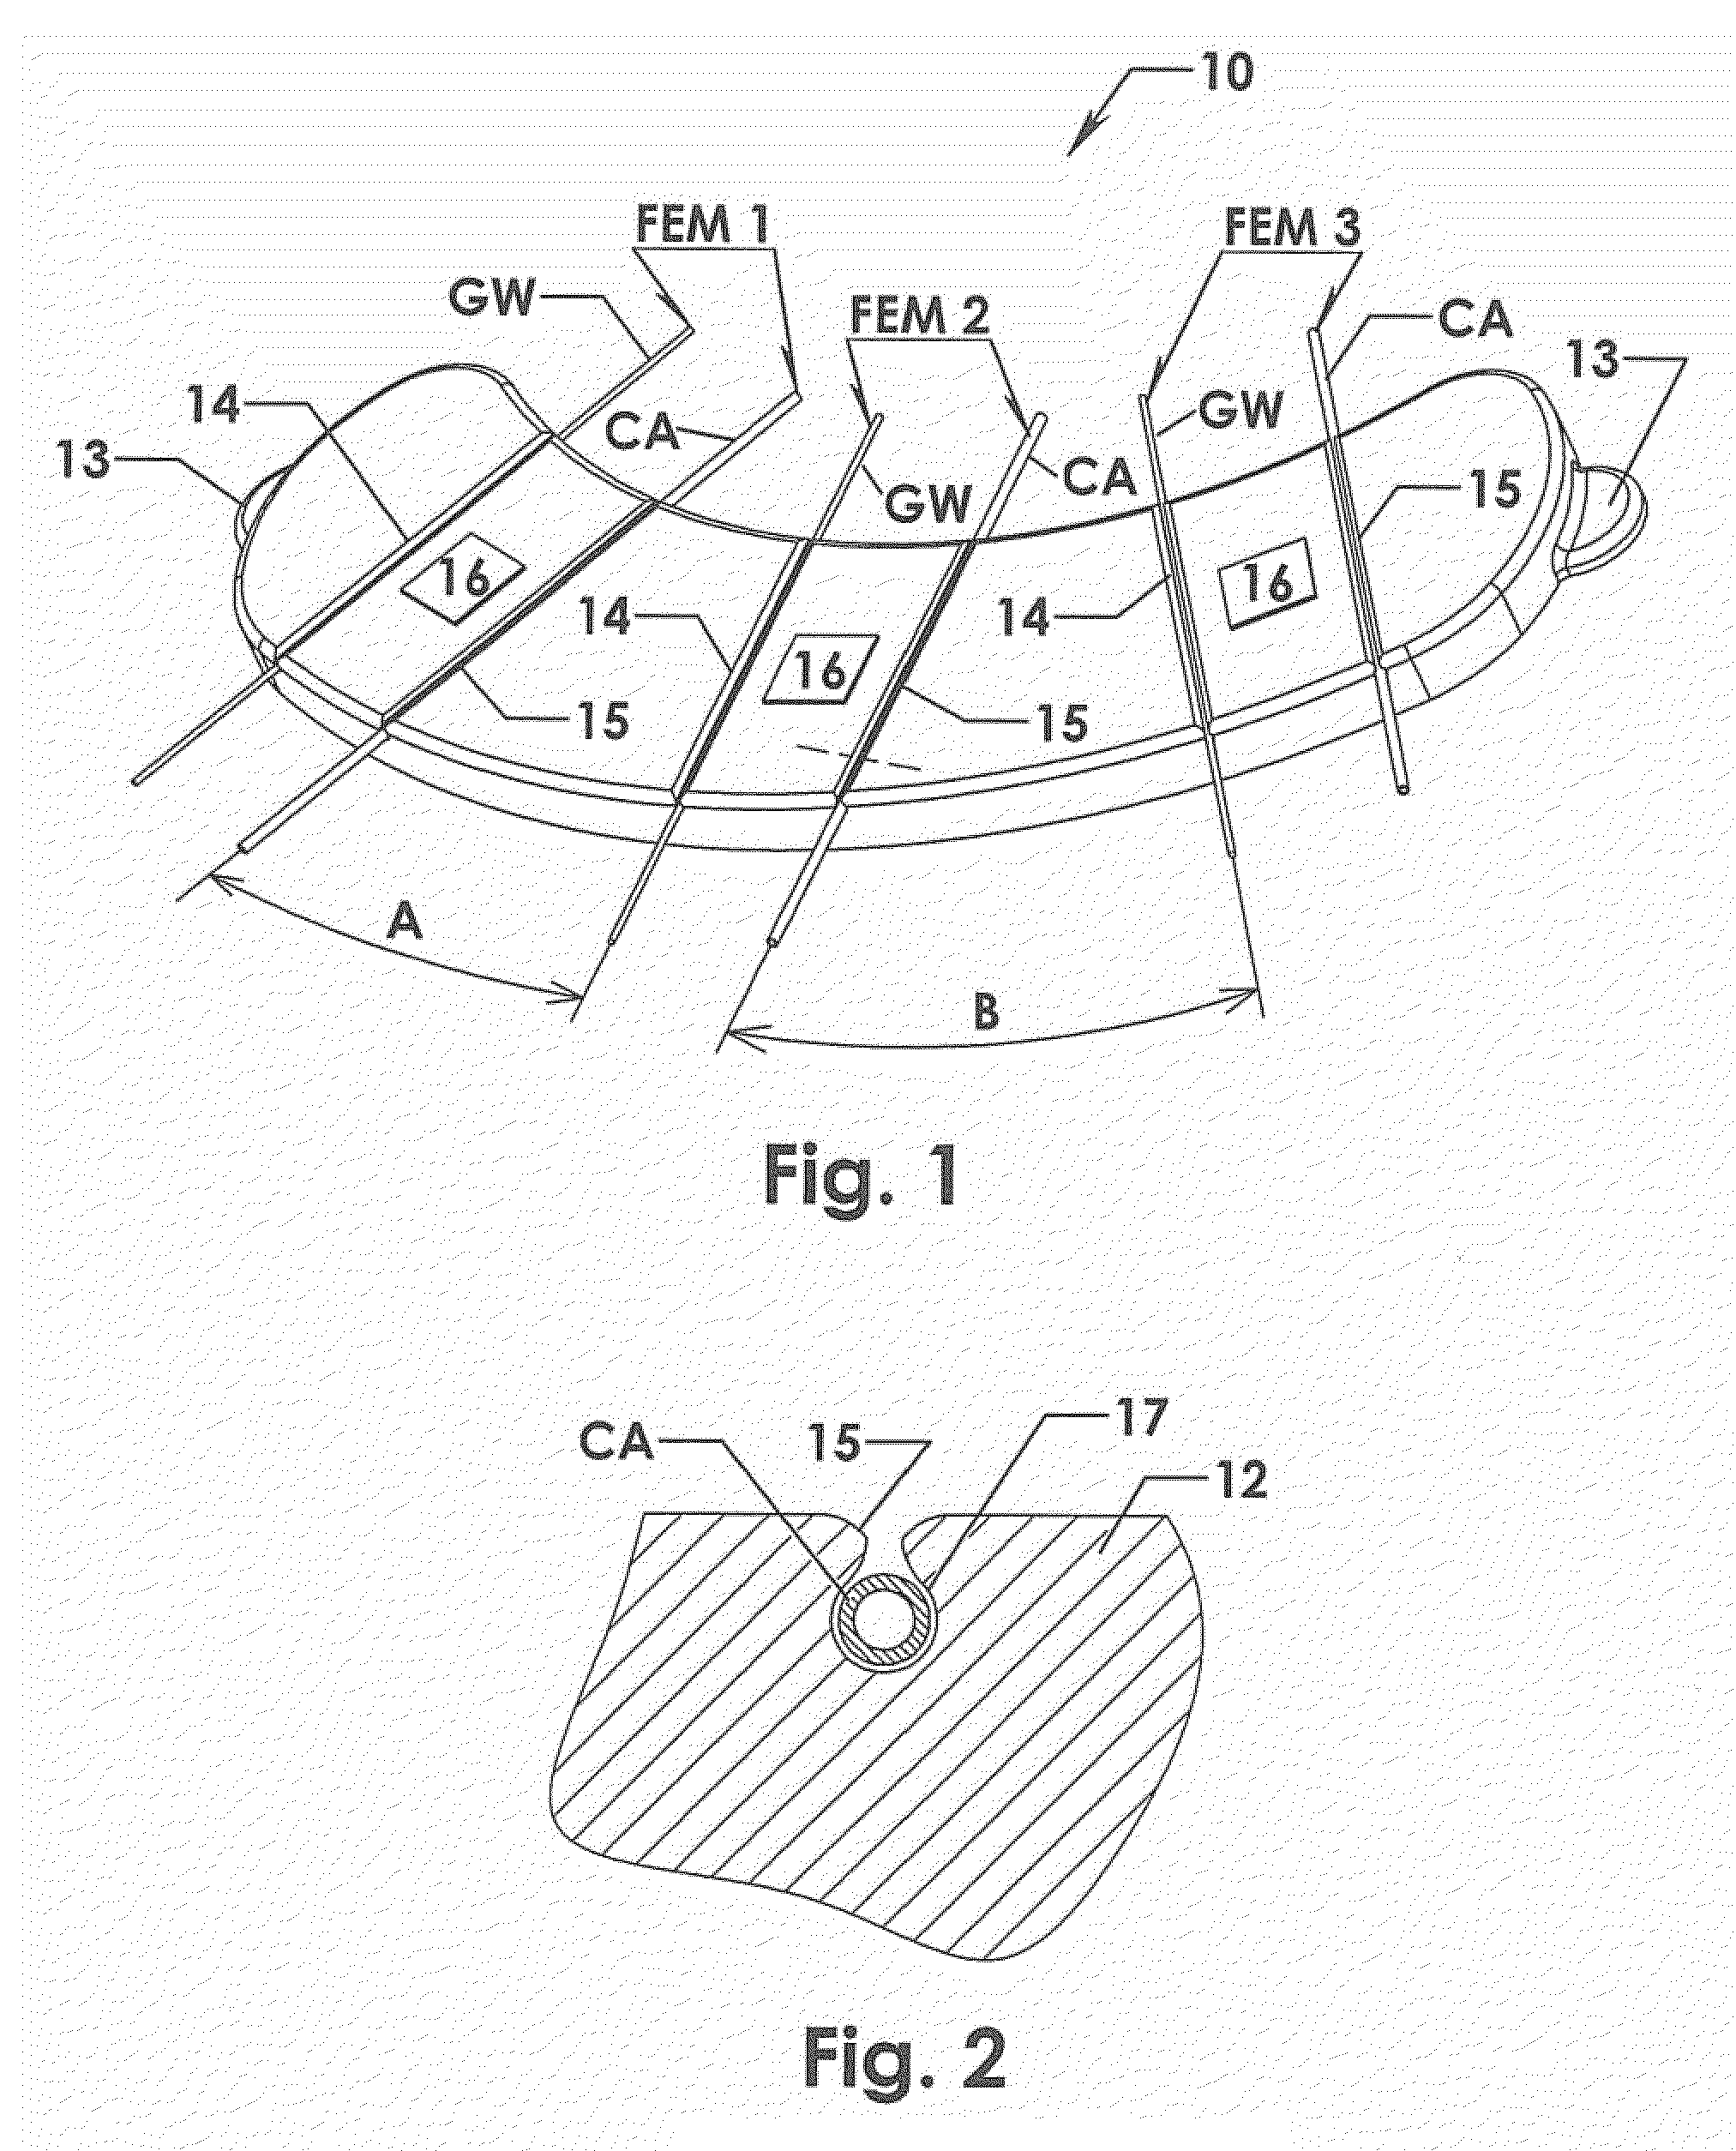 Guidewire and catheter management device